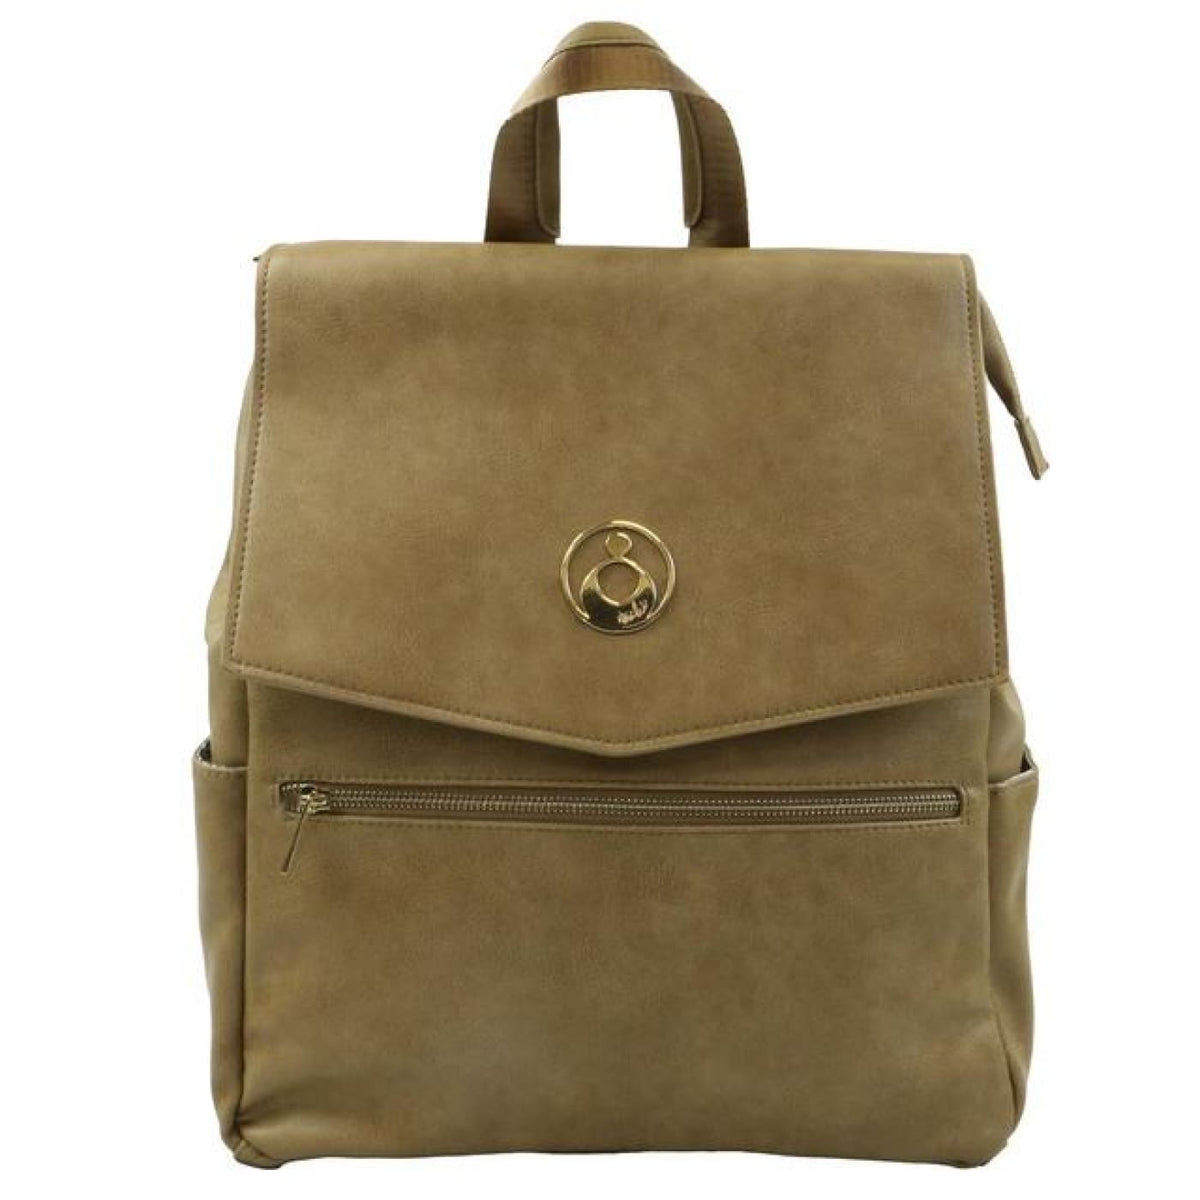 Isoki Hartley Backpack - Latte - Latte - ON THE GO - NAPPY BAGS/LUGGAGE